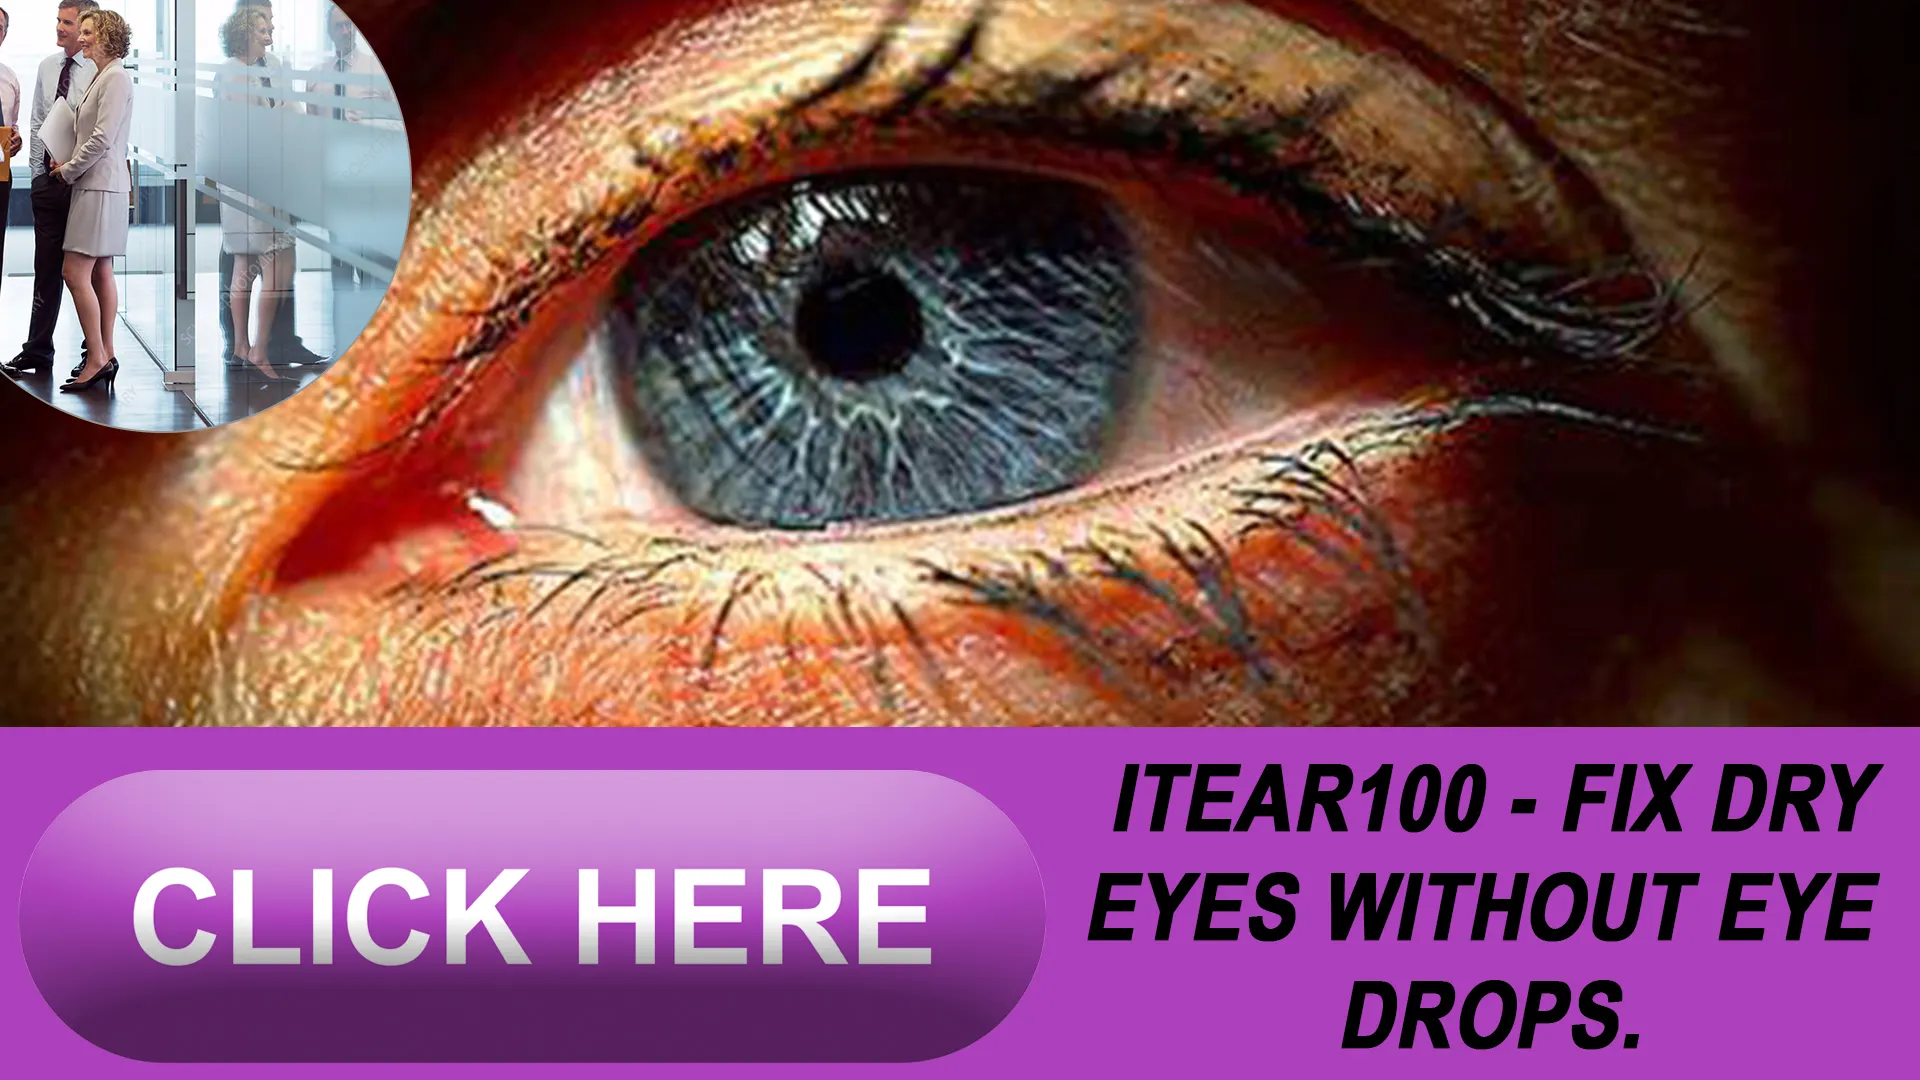 A Revolutionary Approach with the iTEAR100 Device